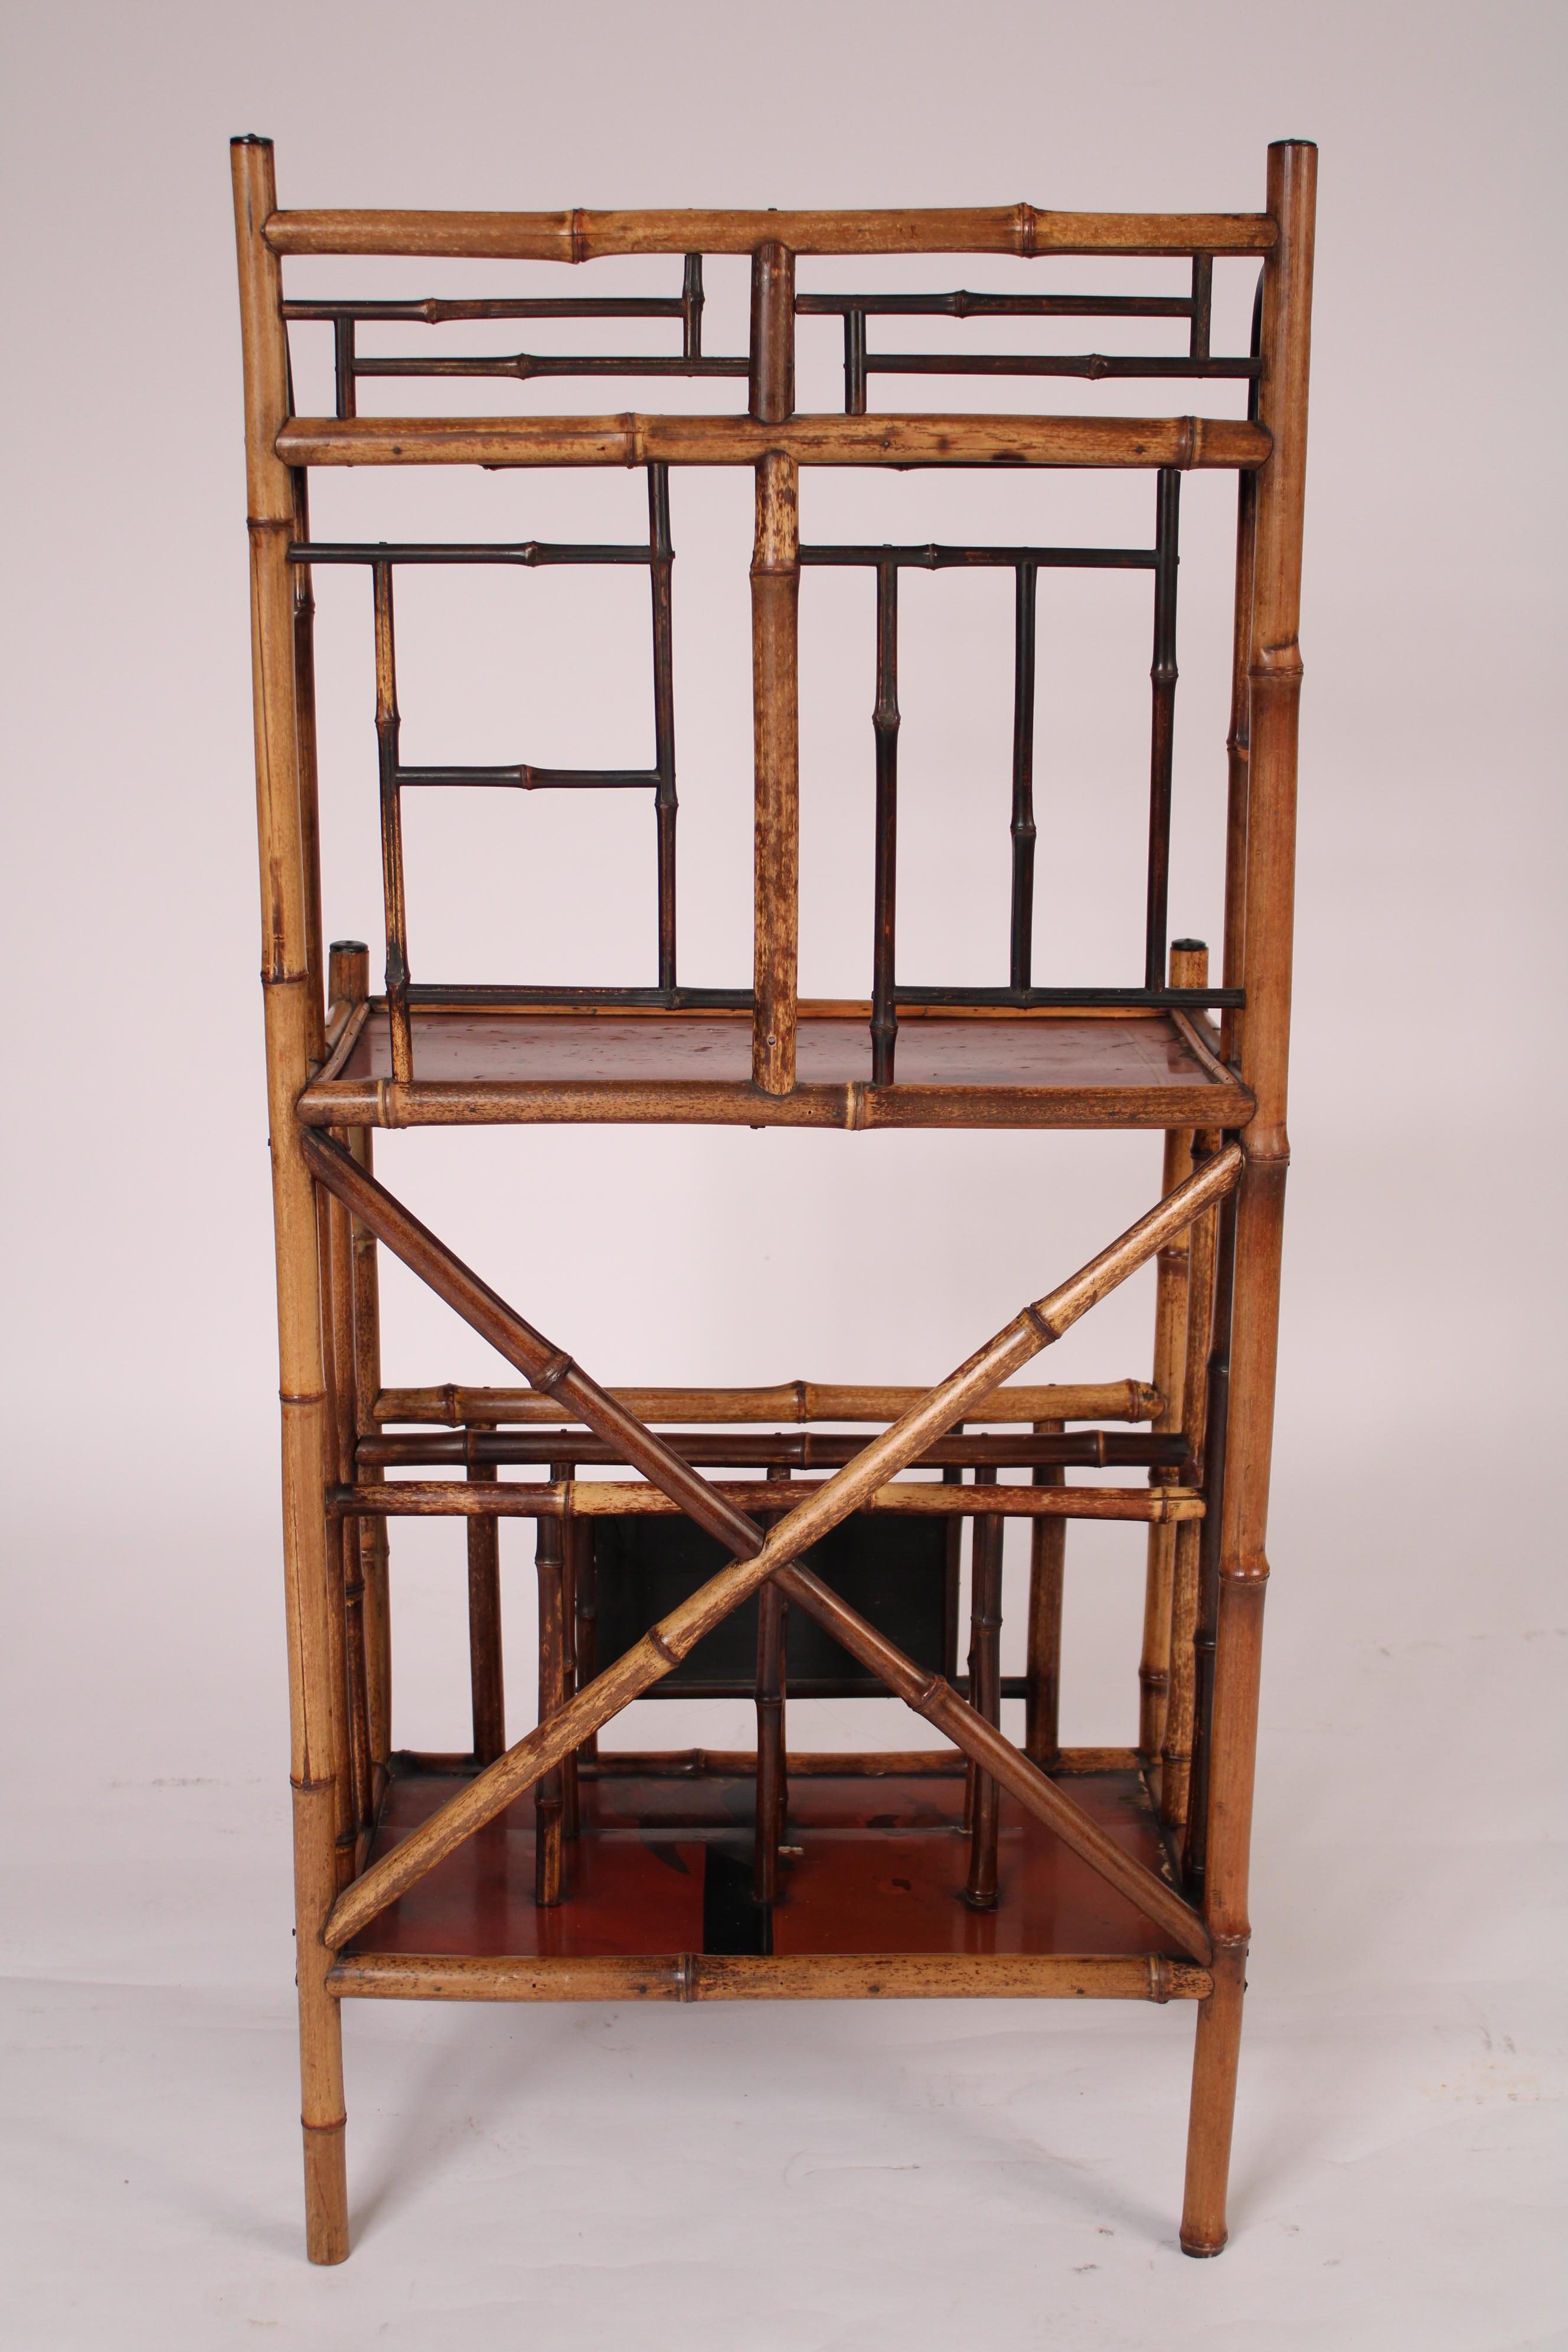 Early 20th Century Aesthetic Movement Bamboo and Lacquer Etagere For Sale